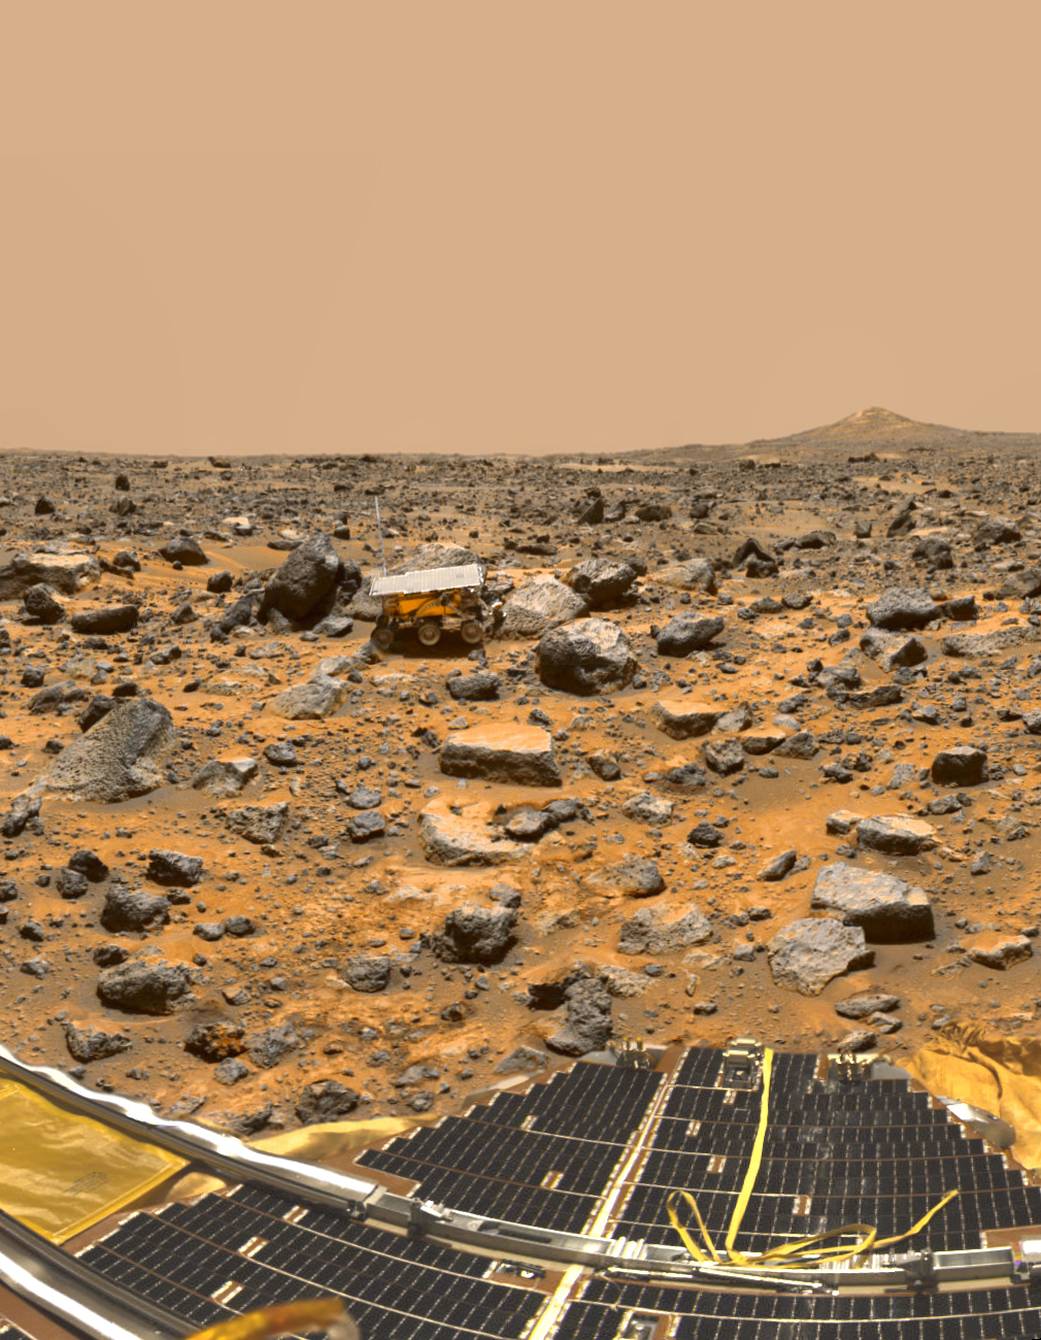 A panoramic view of Pathfinder's Ares Vallis landing site, reveals traces of this warmer, wetter past, showing a floodplain cove